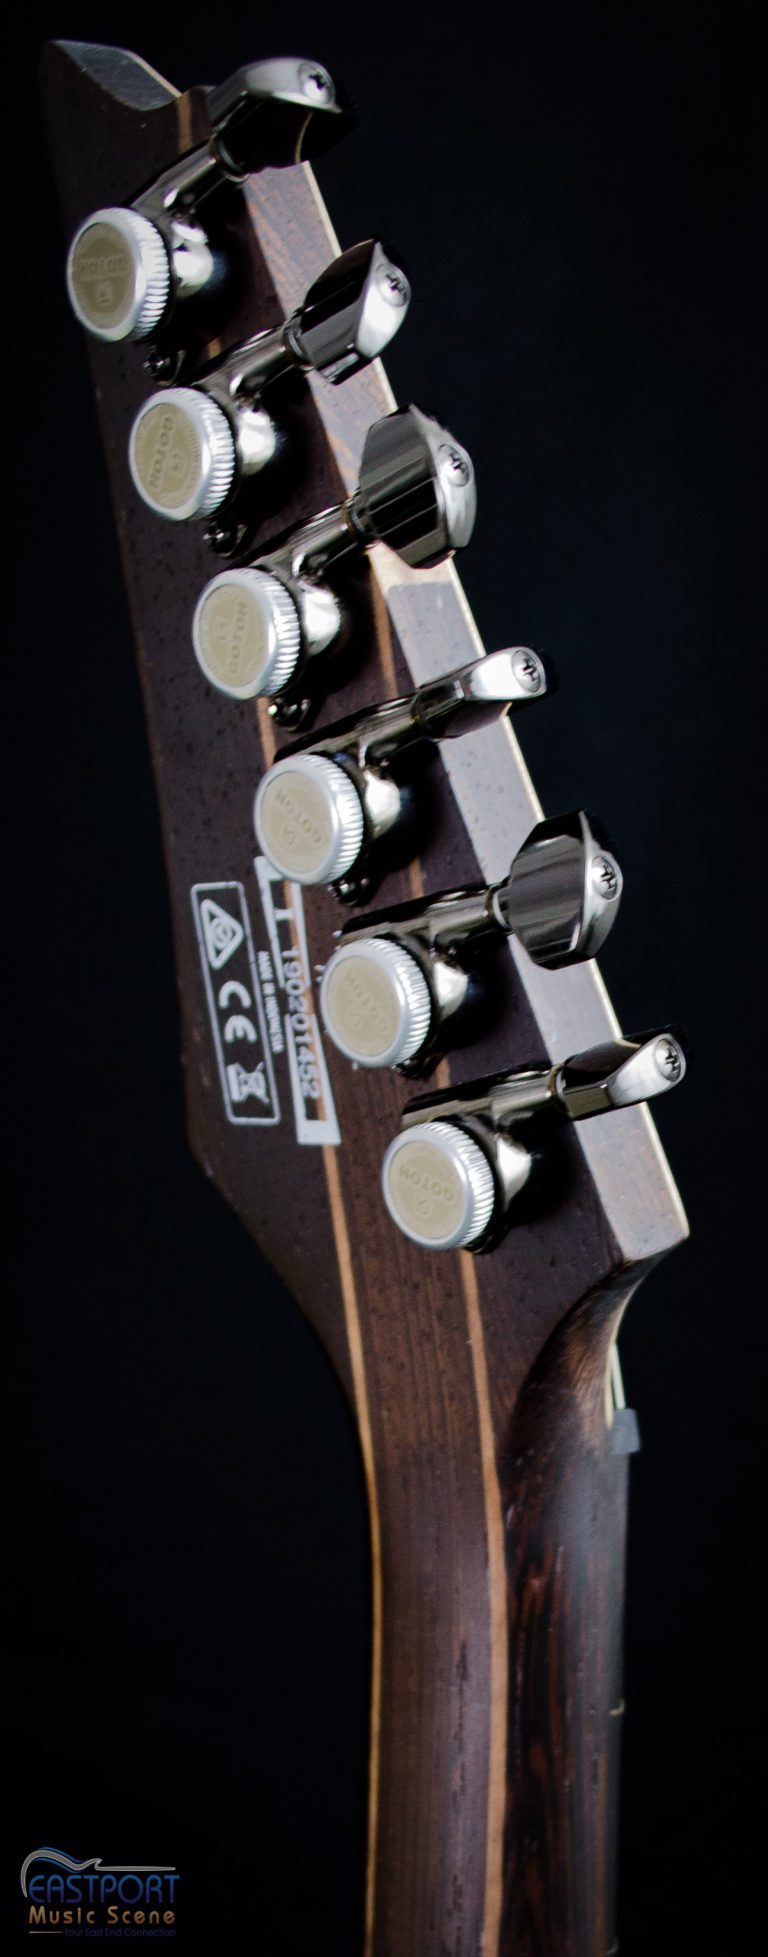 A close up of the headstock and four buttons.